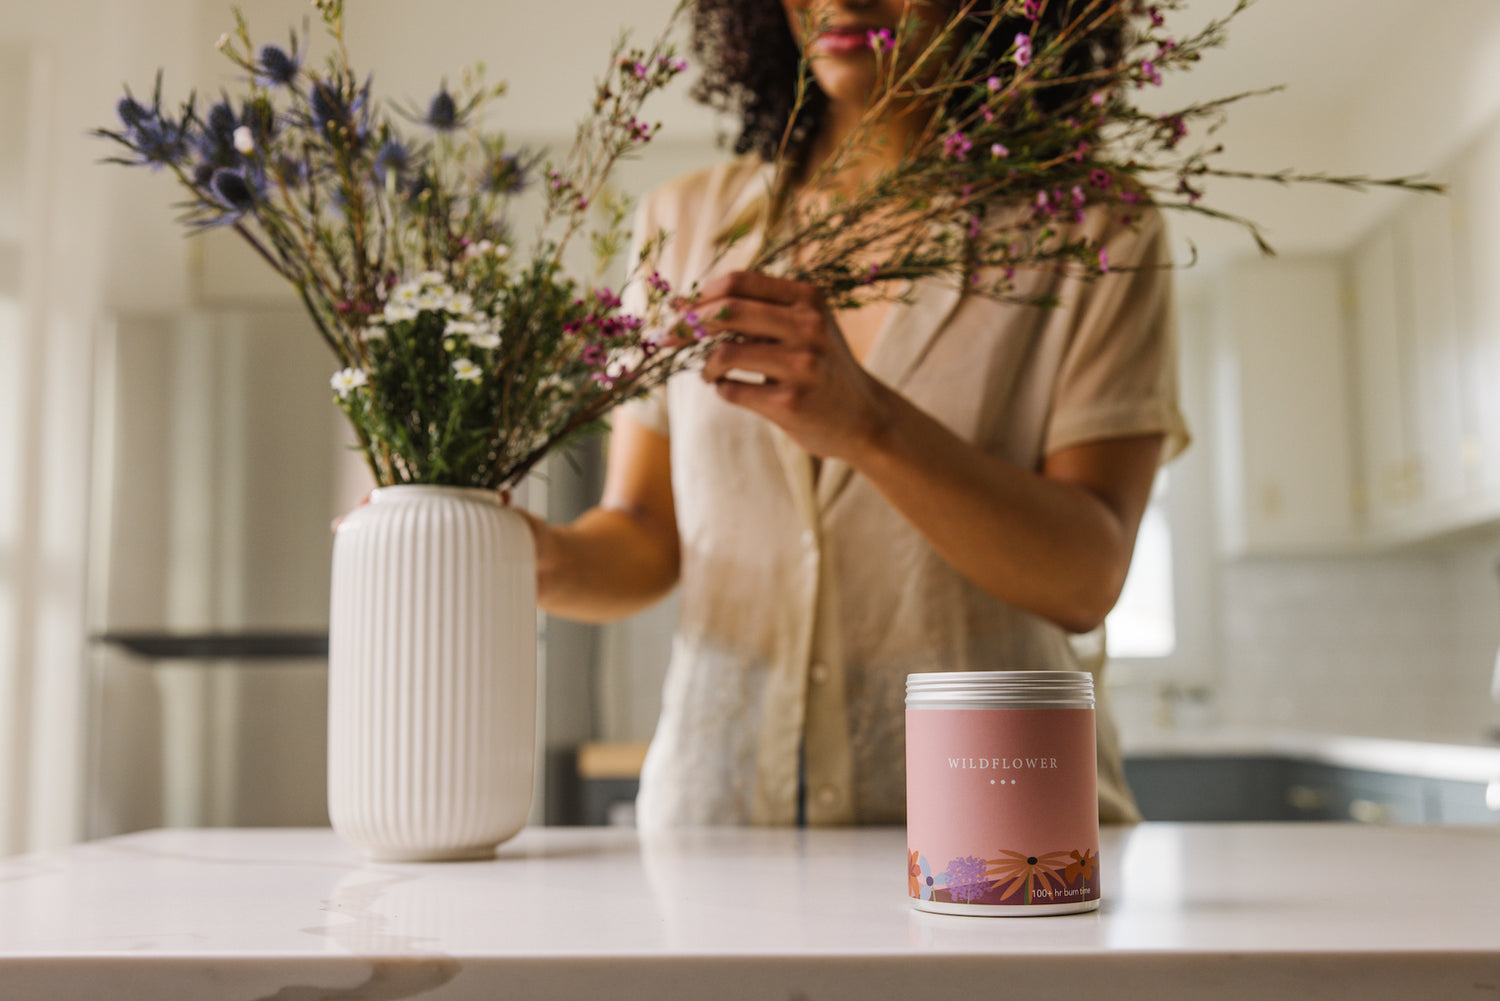 A Wildflower candle next to a vase of wildflowers